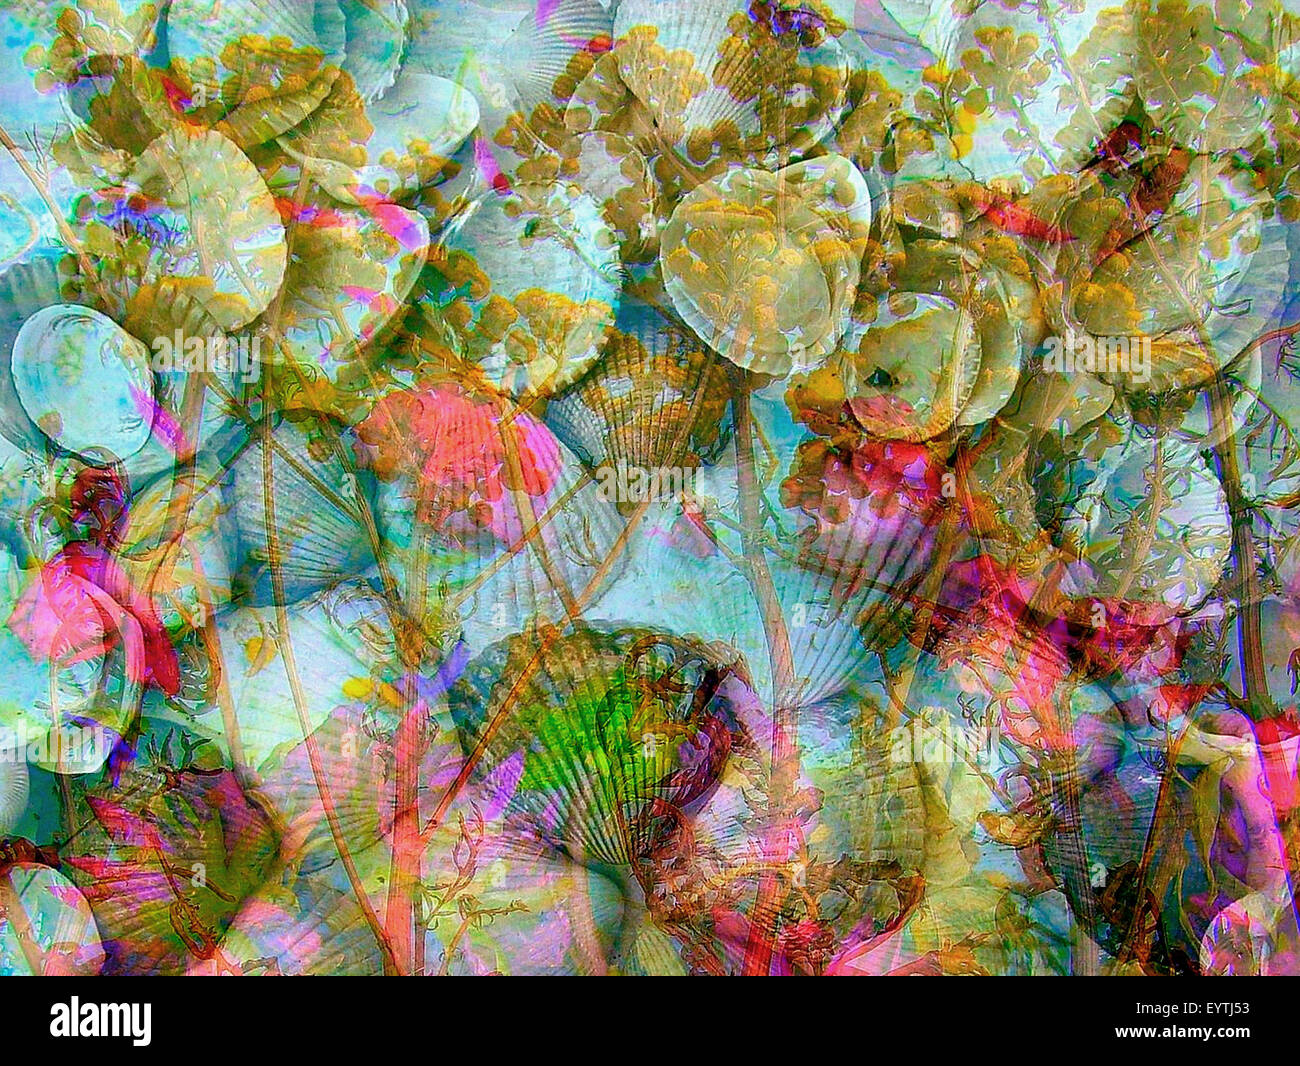 Photomontage of flowers and mussels Stock Photo